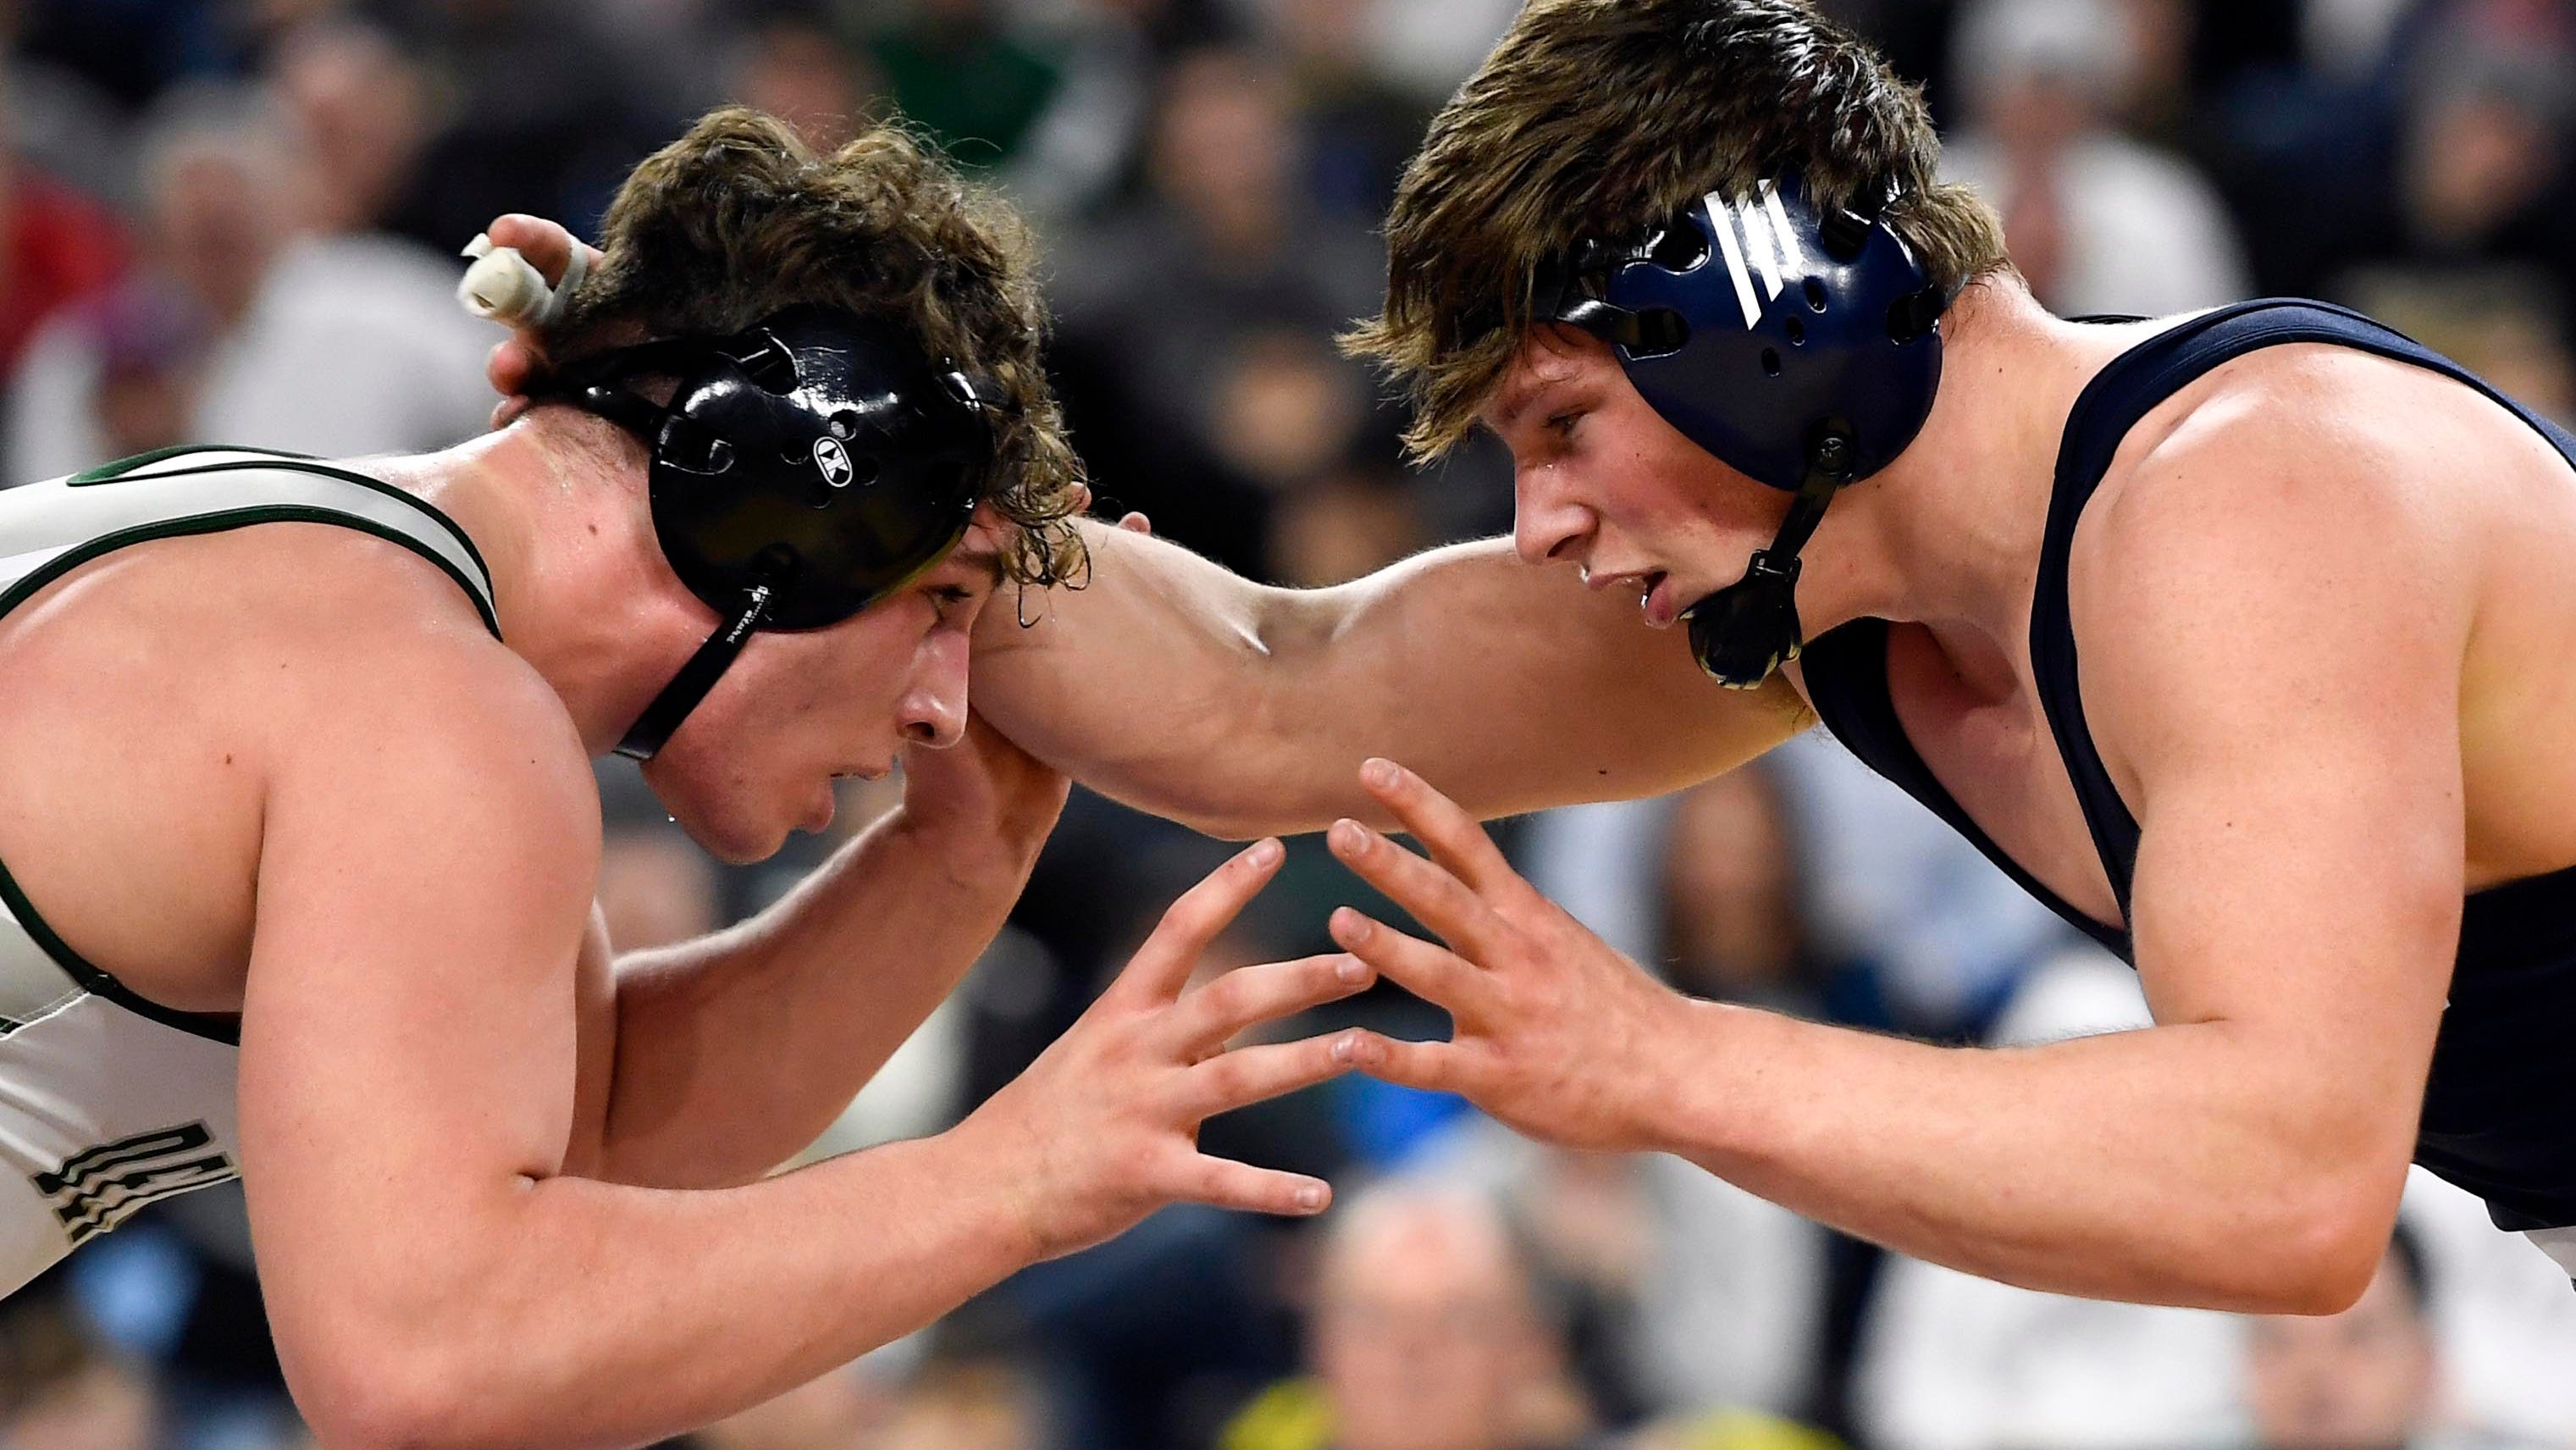 NJ wrestling NJWWA unveils first statewide team rankings of 2021